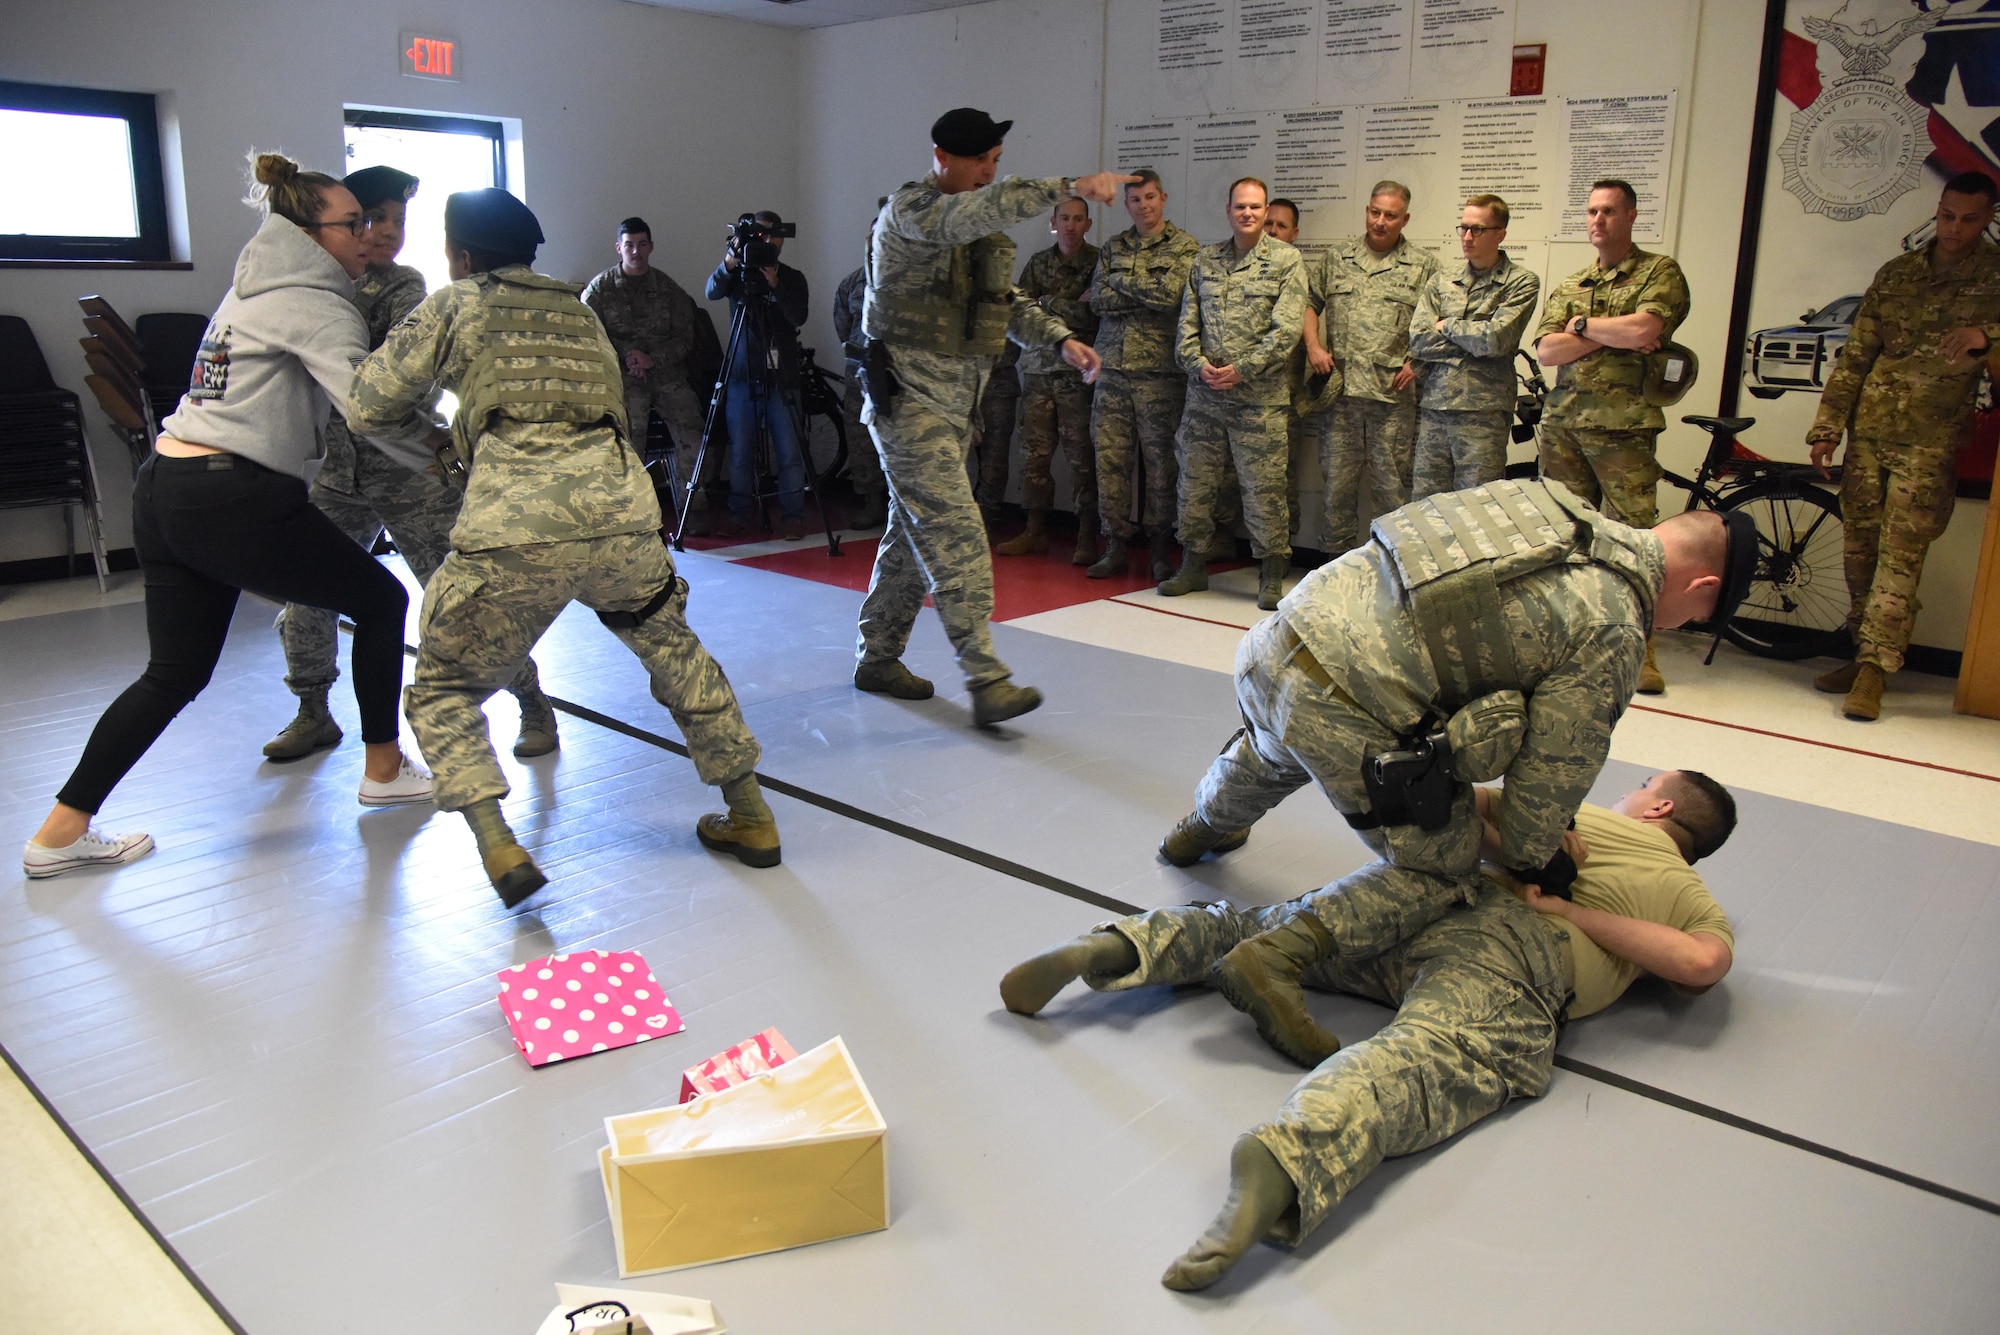 Members of the 81st Security Forces Squadron participate in a mock response to a domestic disturbance during the 81st SFS Day In The Life Of A Defender event at Keesler Air Force Base, Mississippi, Dec. 18, 2018. The event, which was the kick-off for the Year Of The Defender, allowed the 81st SFS to showcase their training and mission capabilities to Keesler leadership. (U.S. Air Force photo by Kemberly Groue)